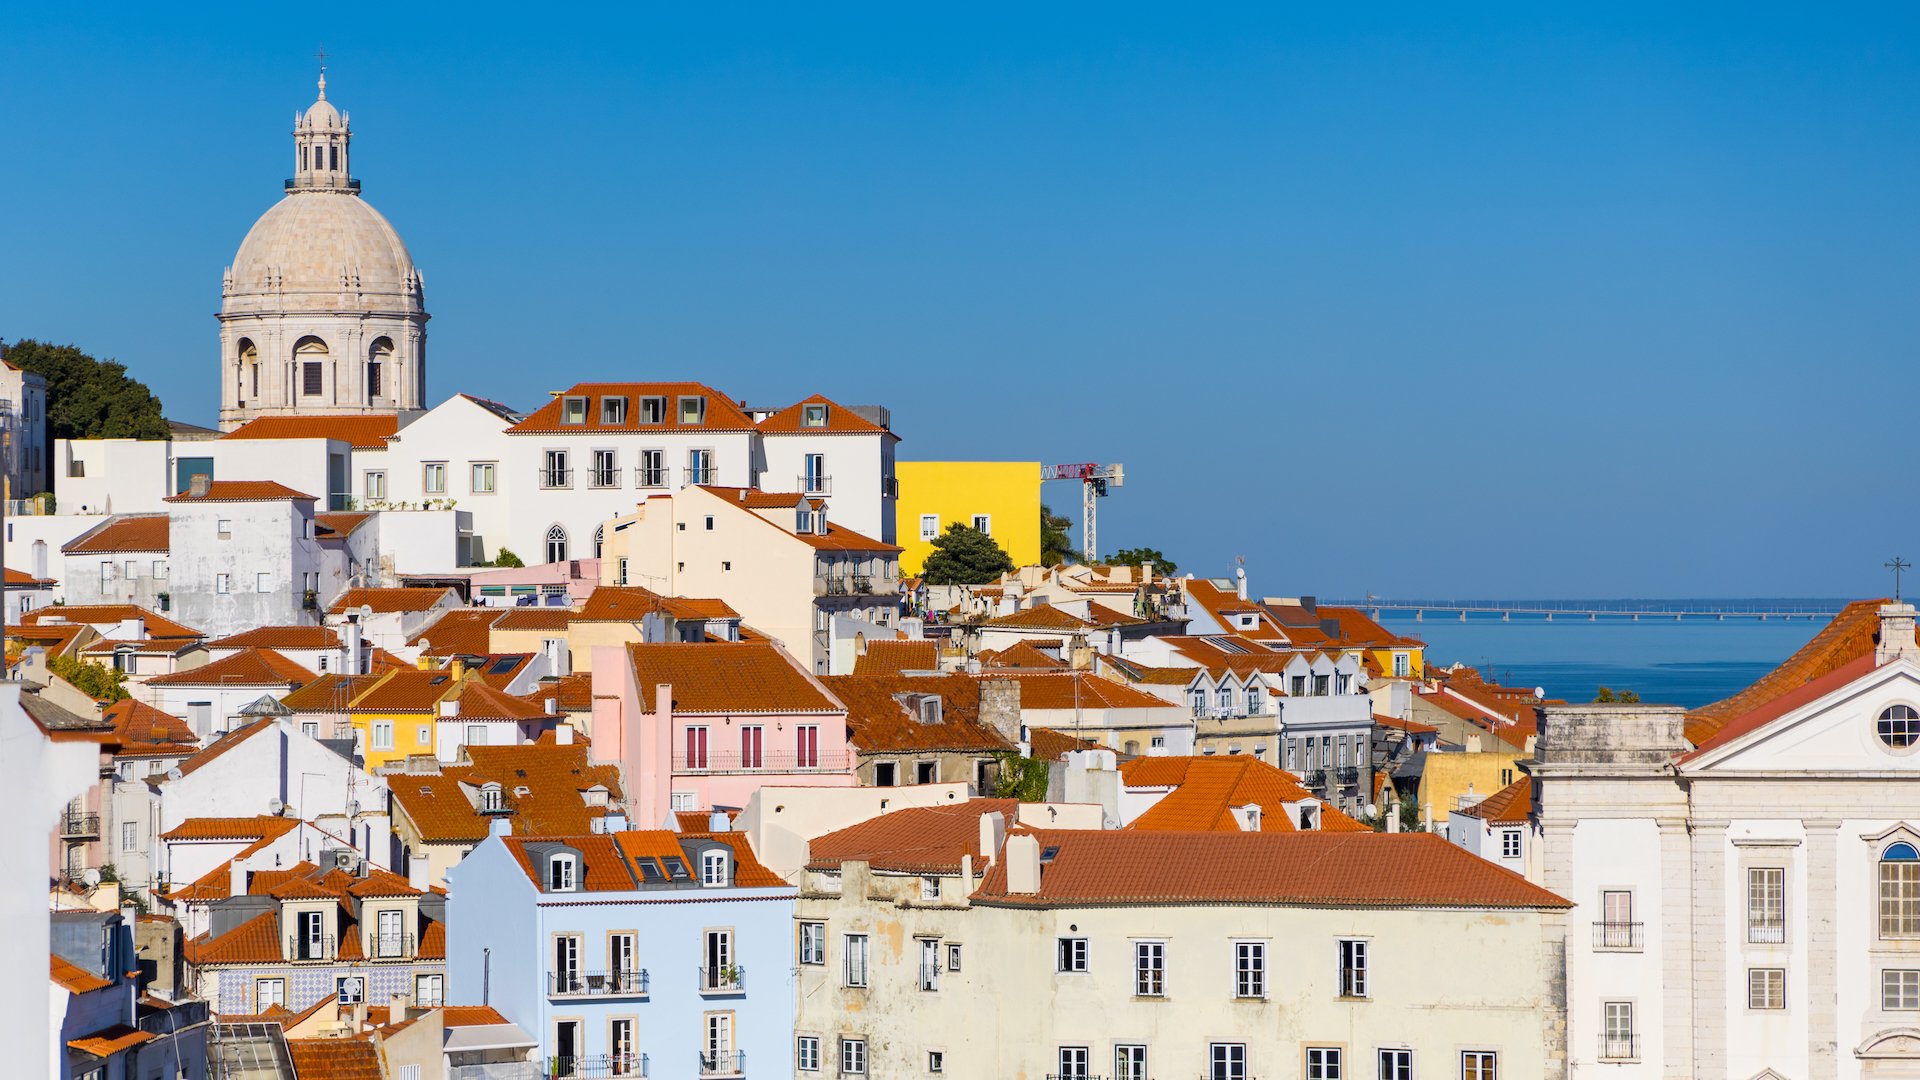  This is the view in my head when I think of Lisbon. 